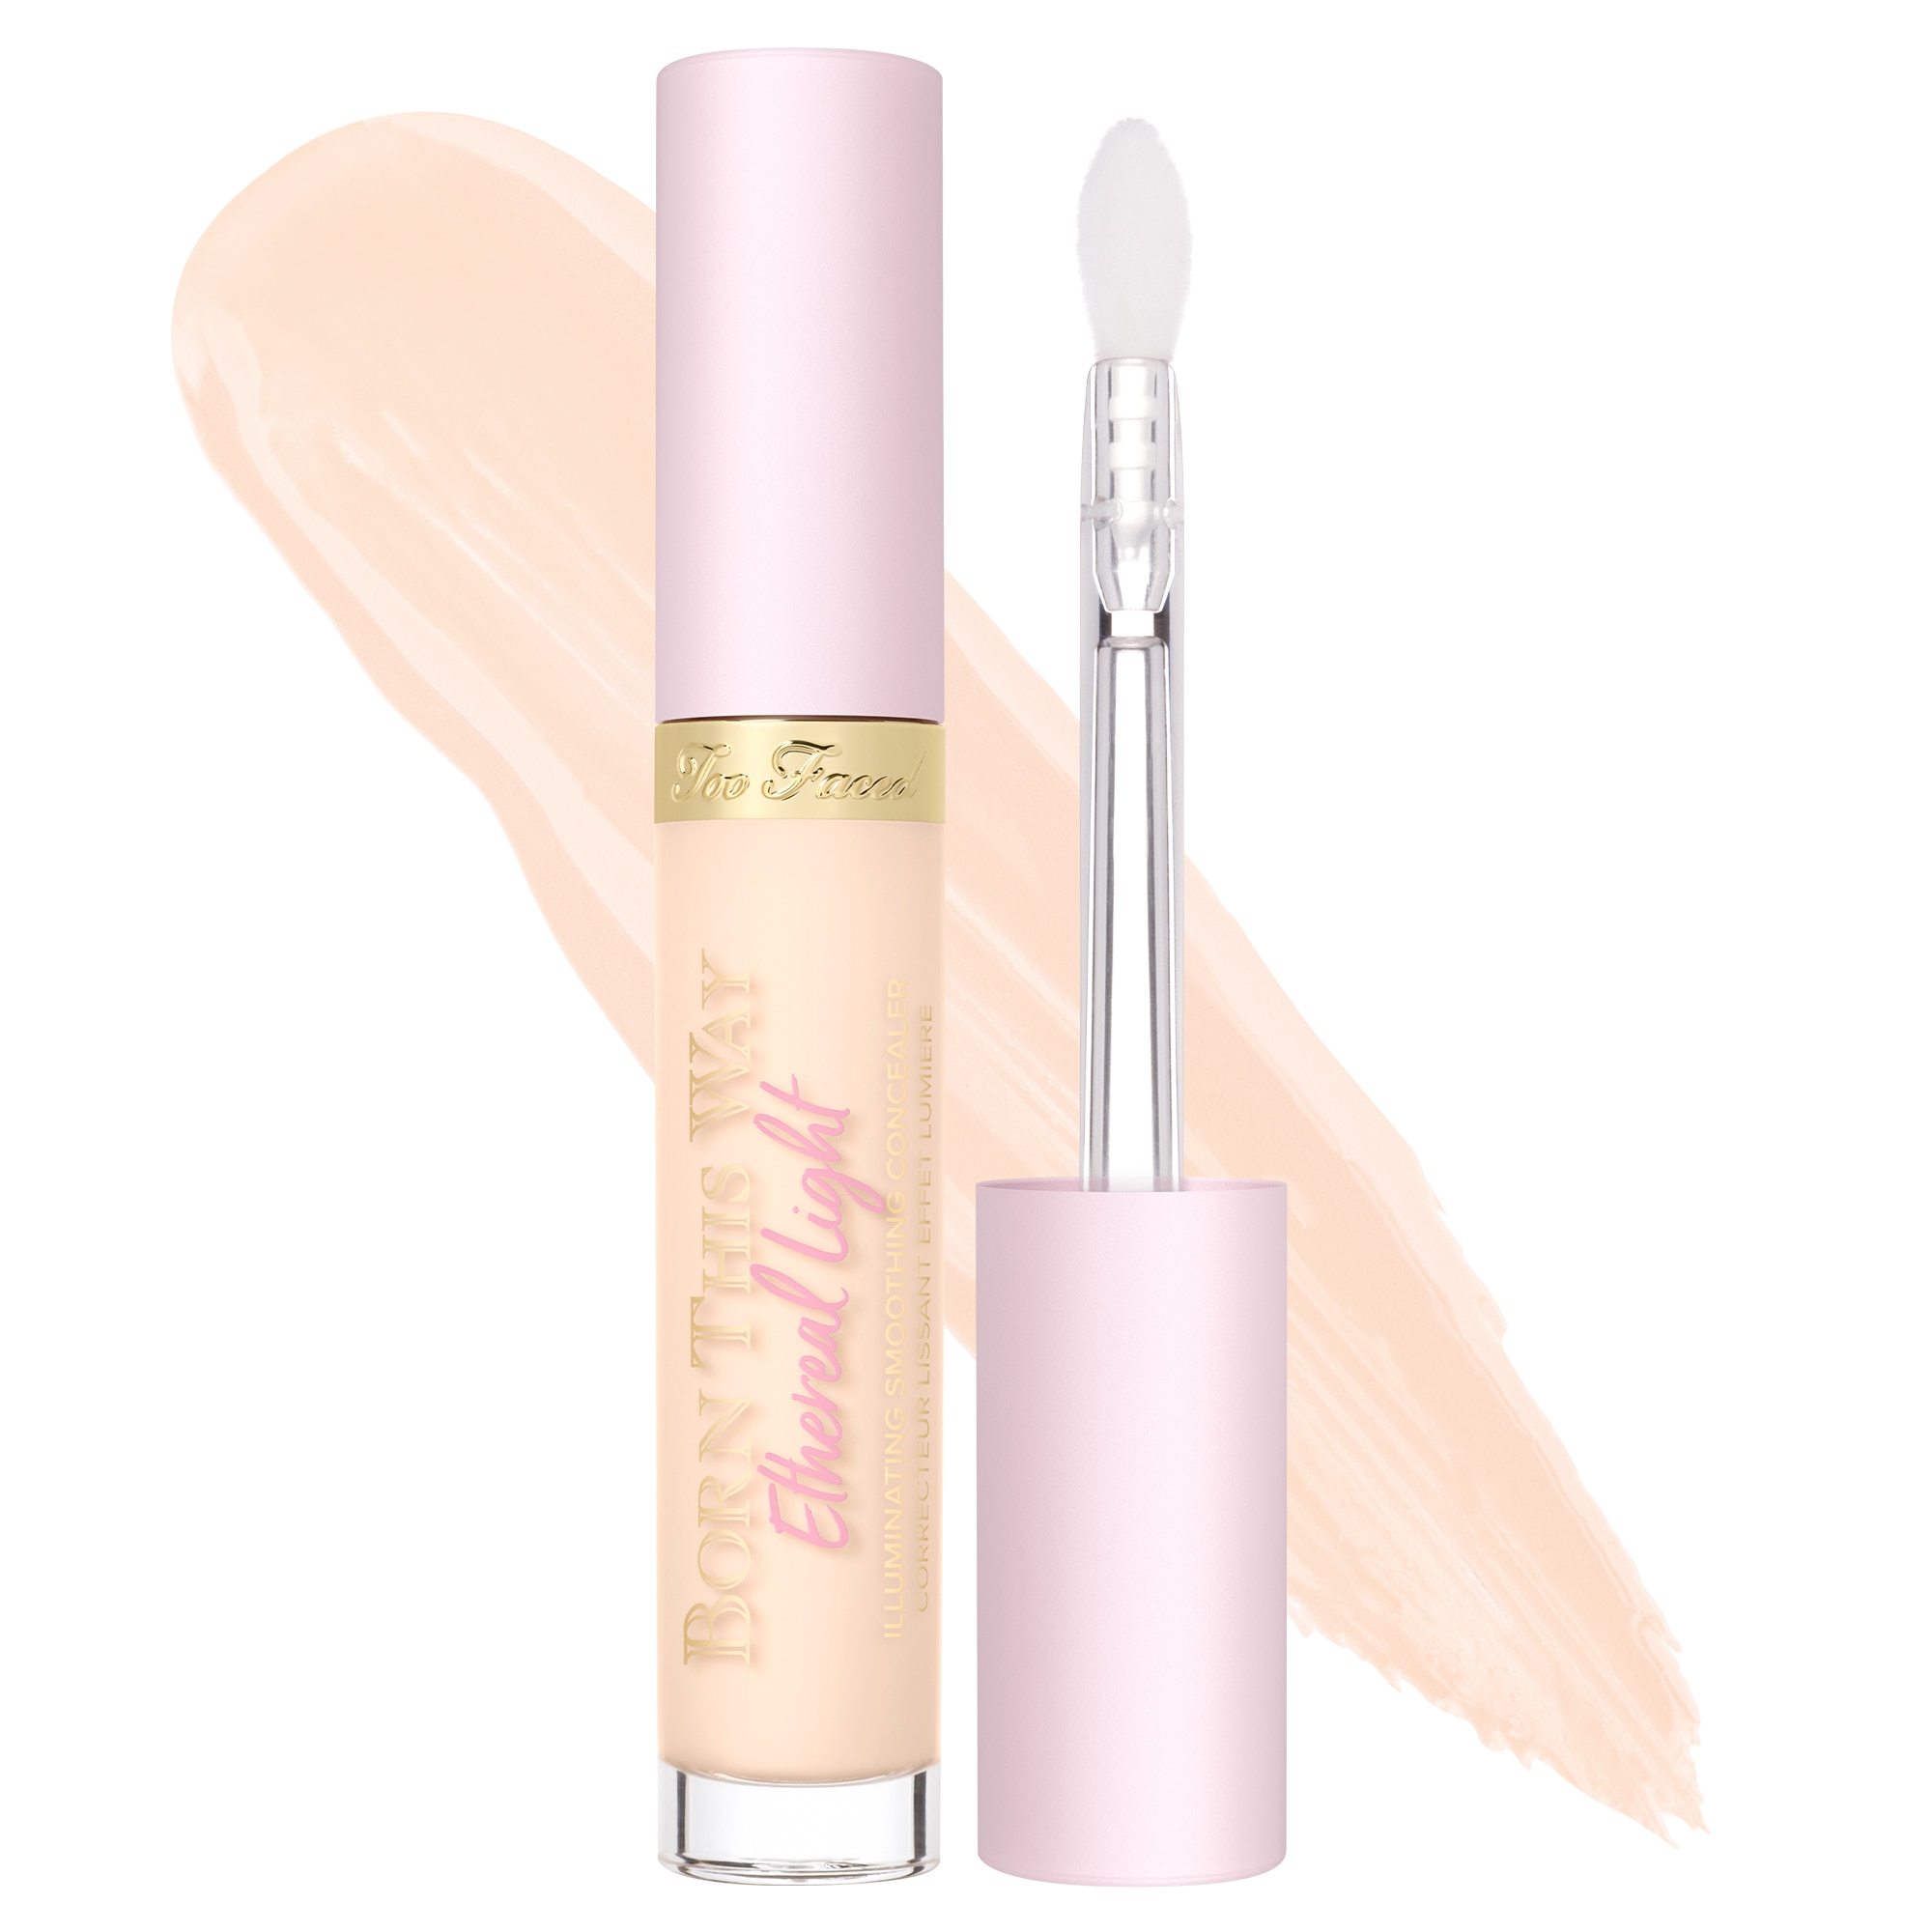 Icon image of Born This Way Ethereal Light Illuminating Smoothing Concealer for side-by-side ingredient comparison.